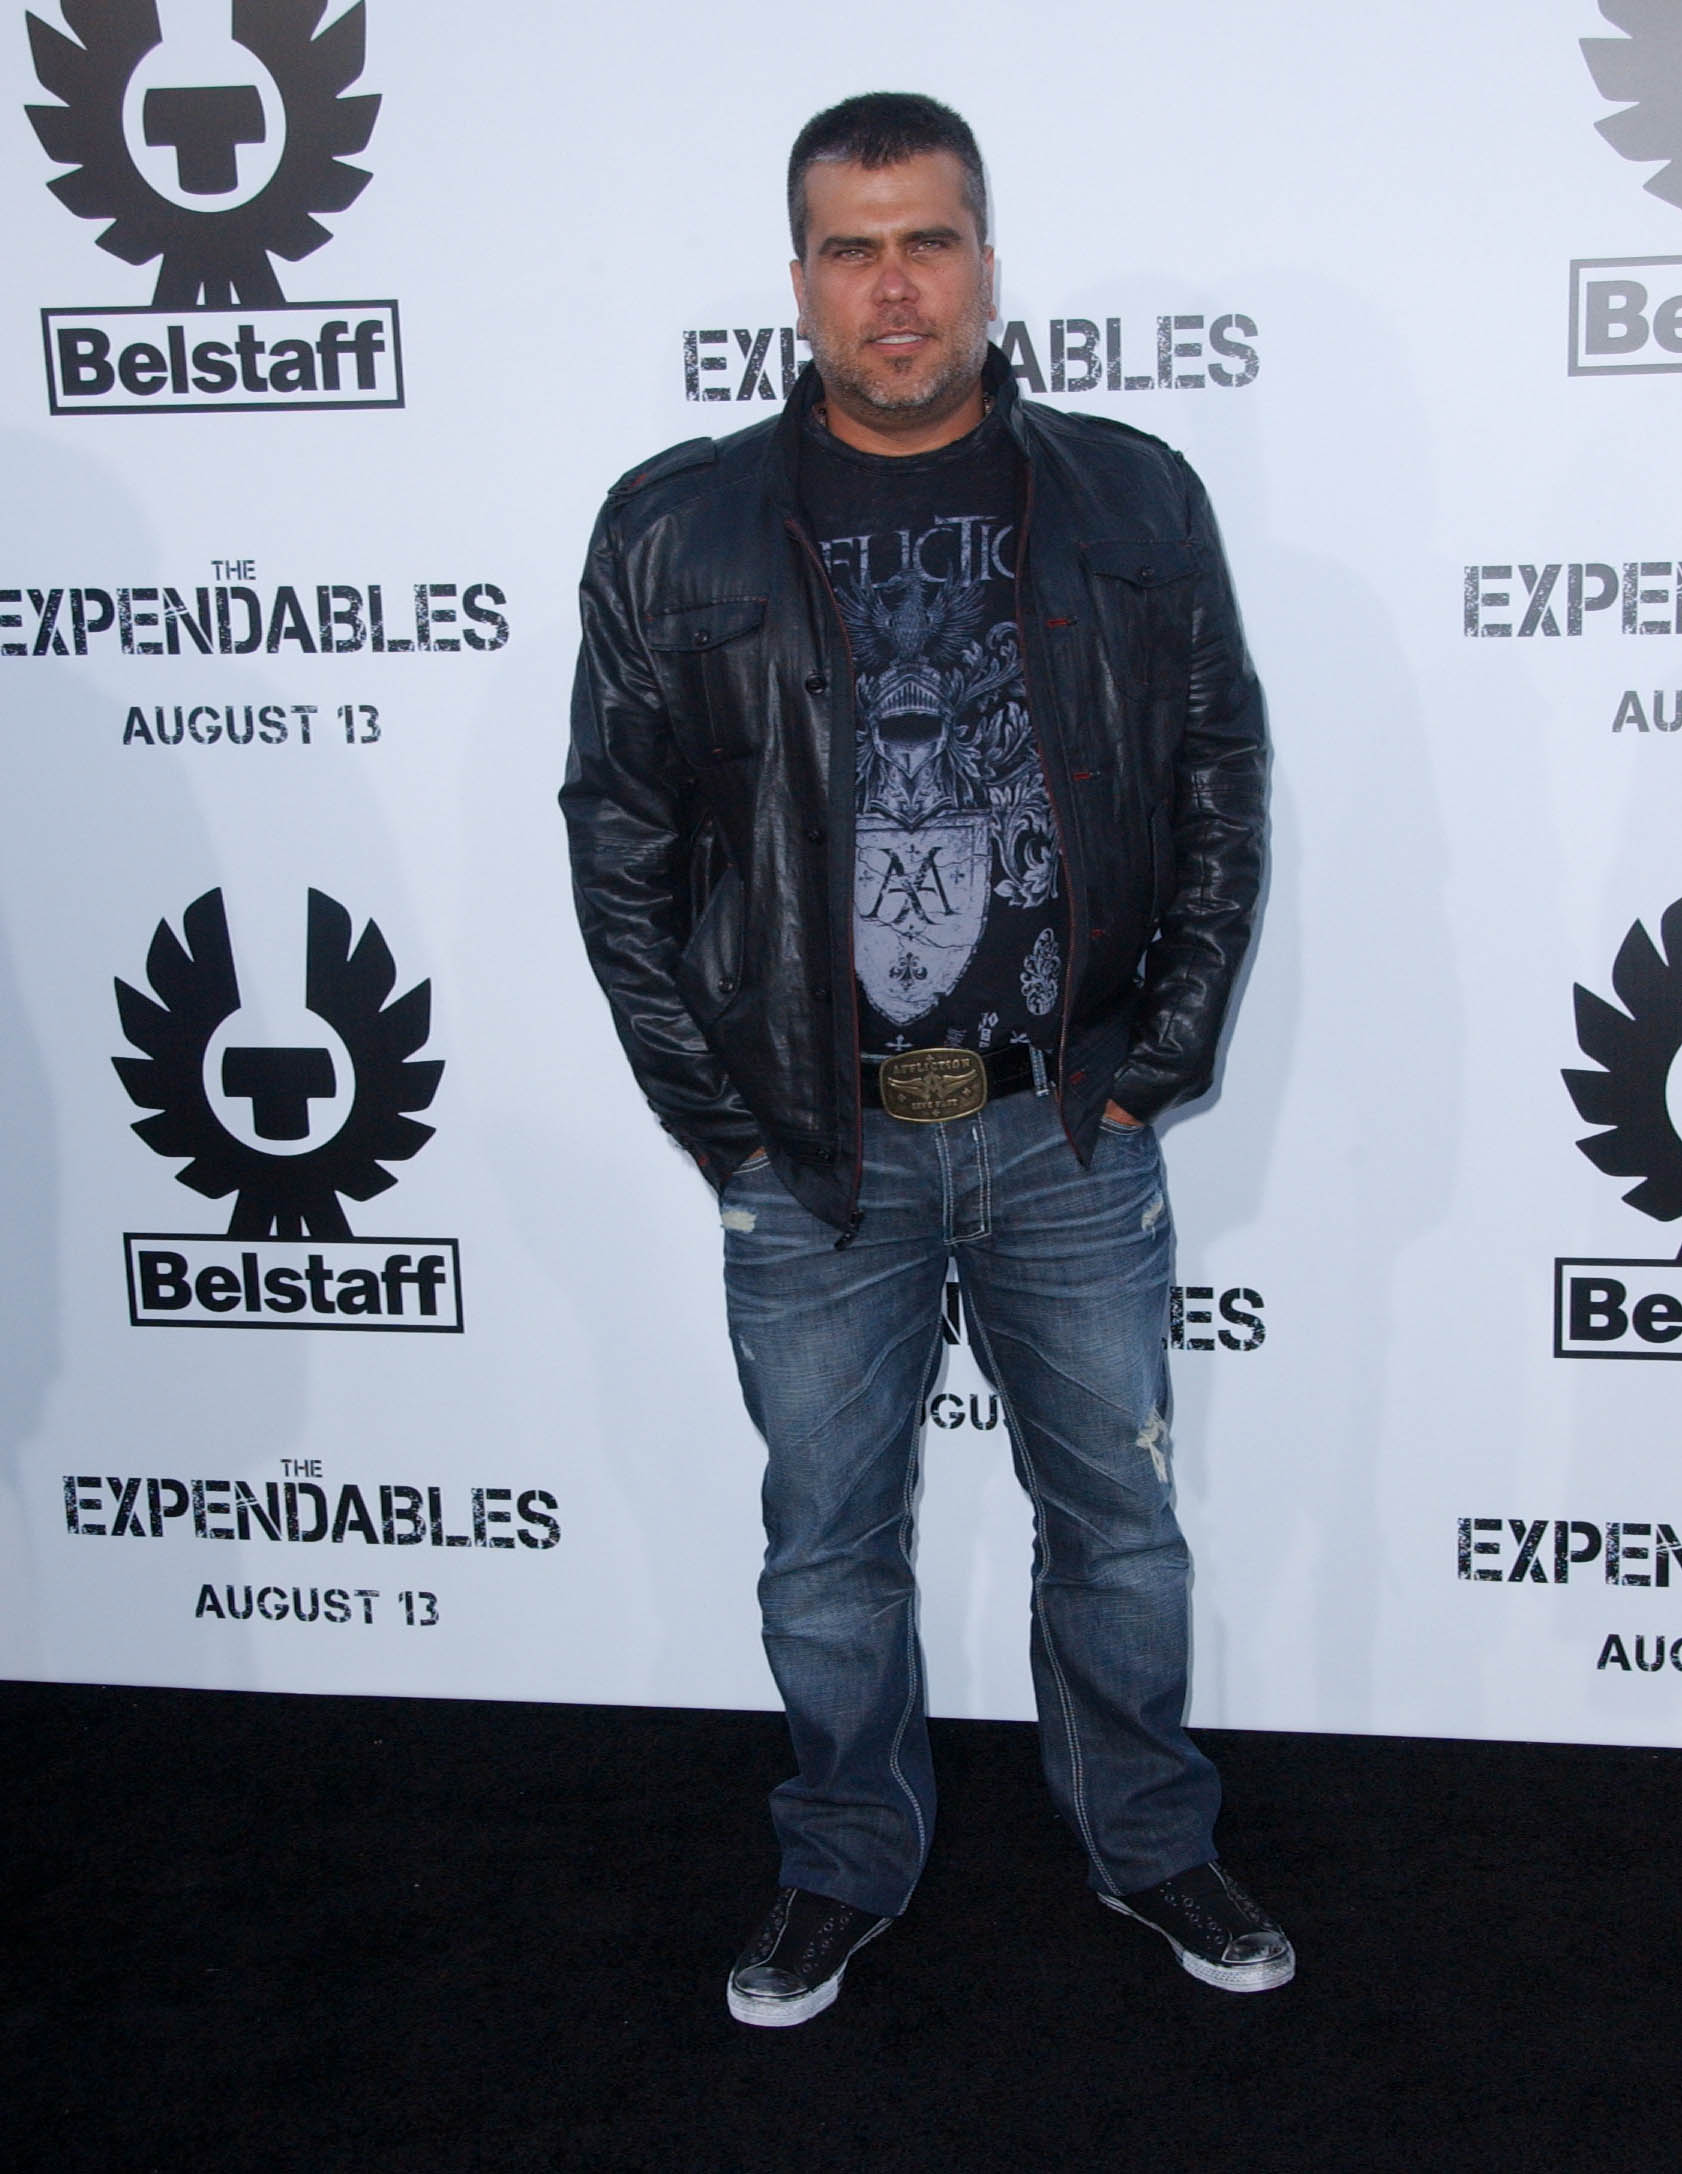 Expendables premiere at the Chinese Theatre in Hollywood